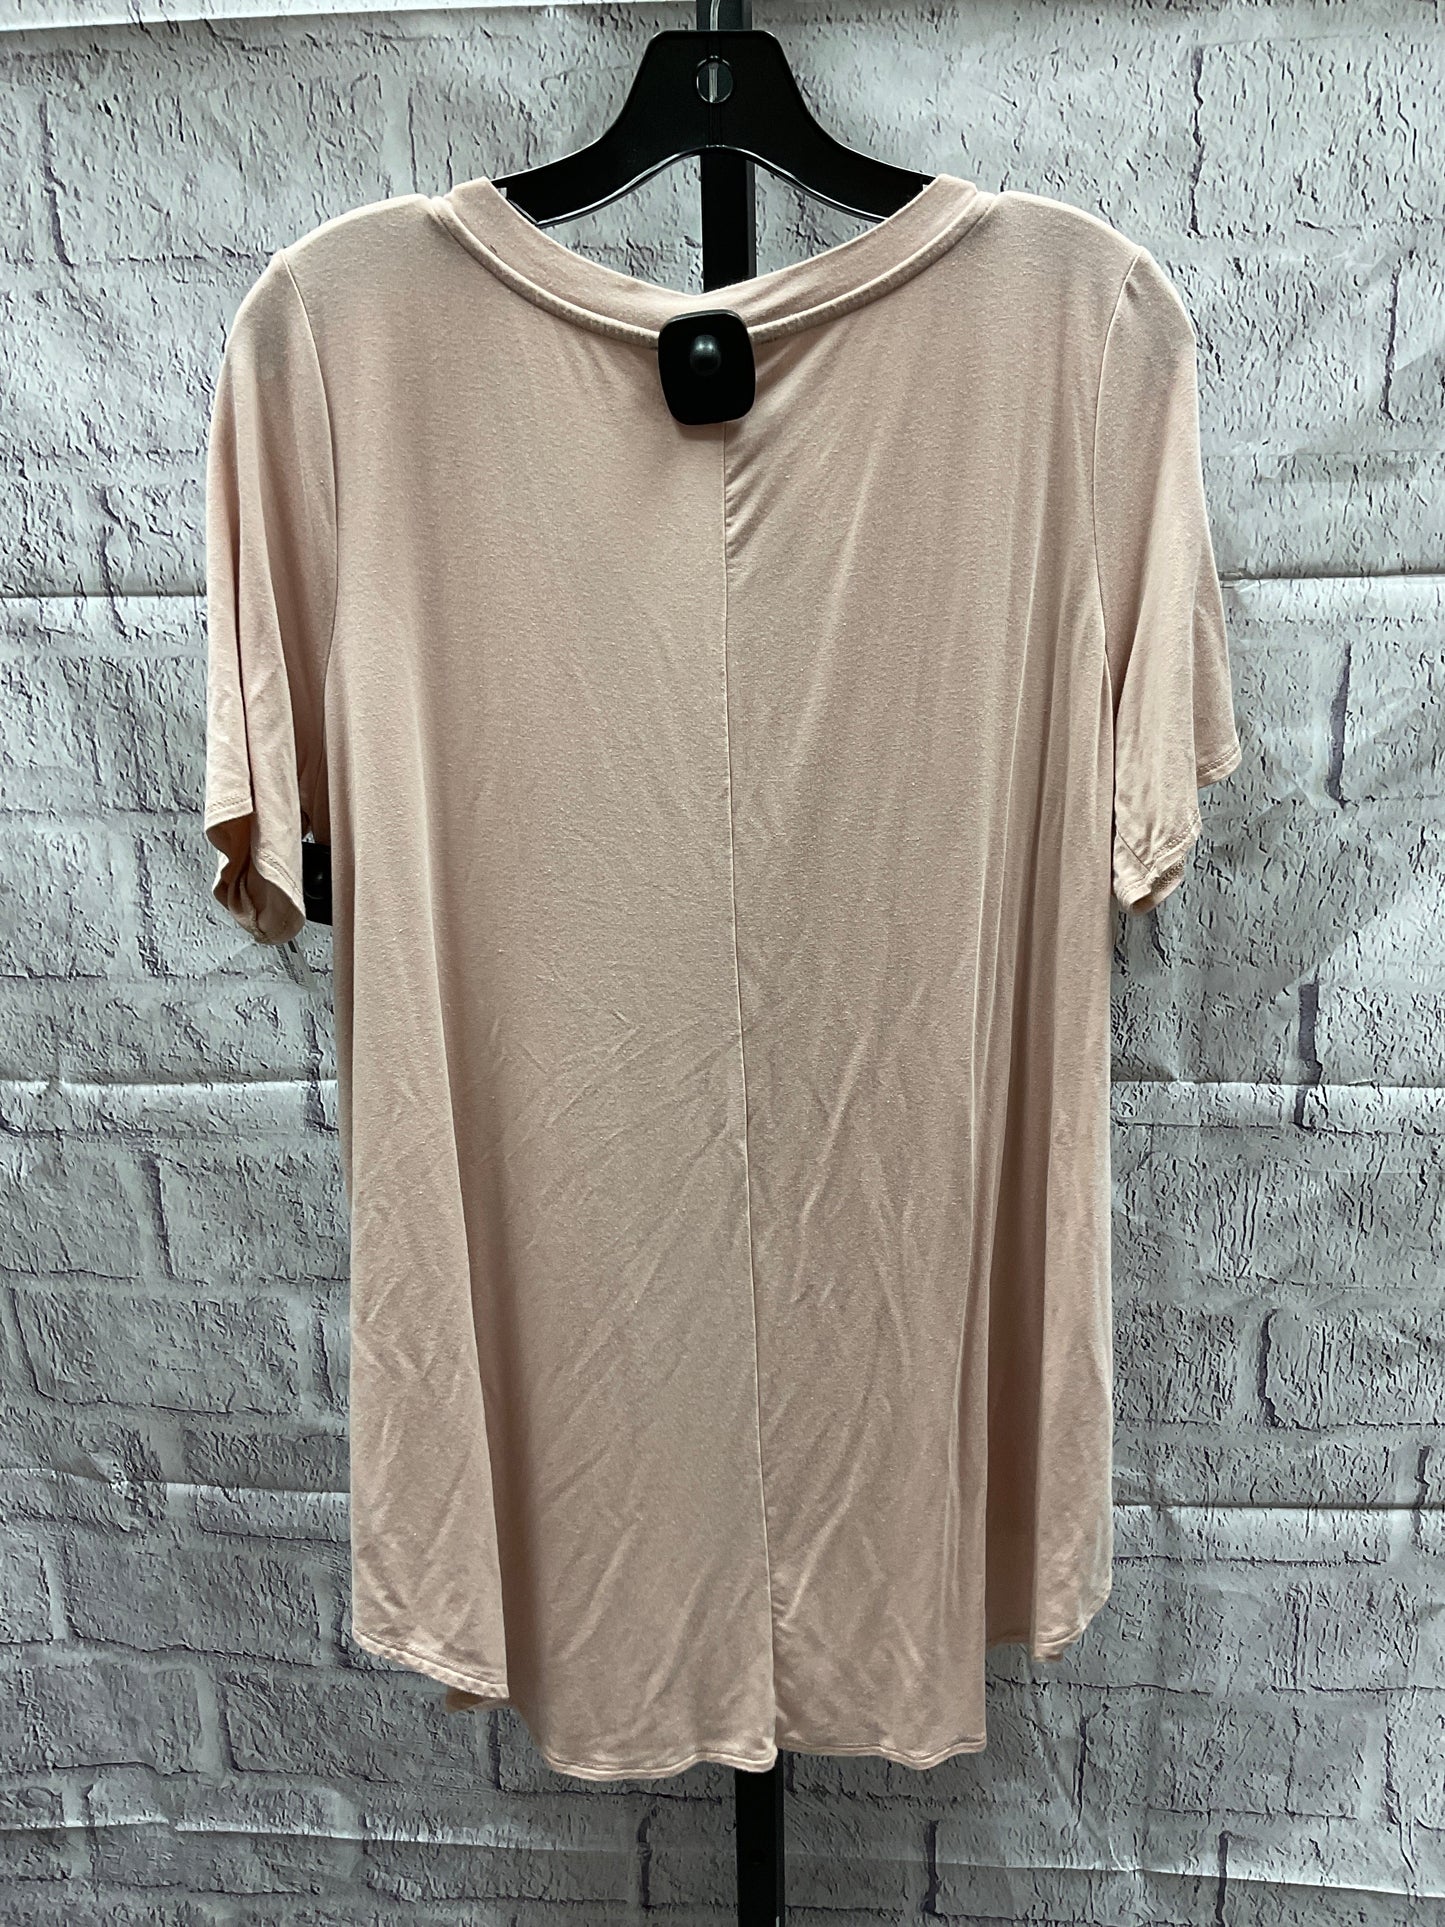 Top Short Sleeve By Zenana Outfitters  Size: Xl